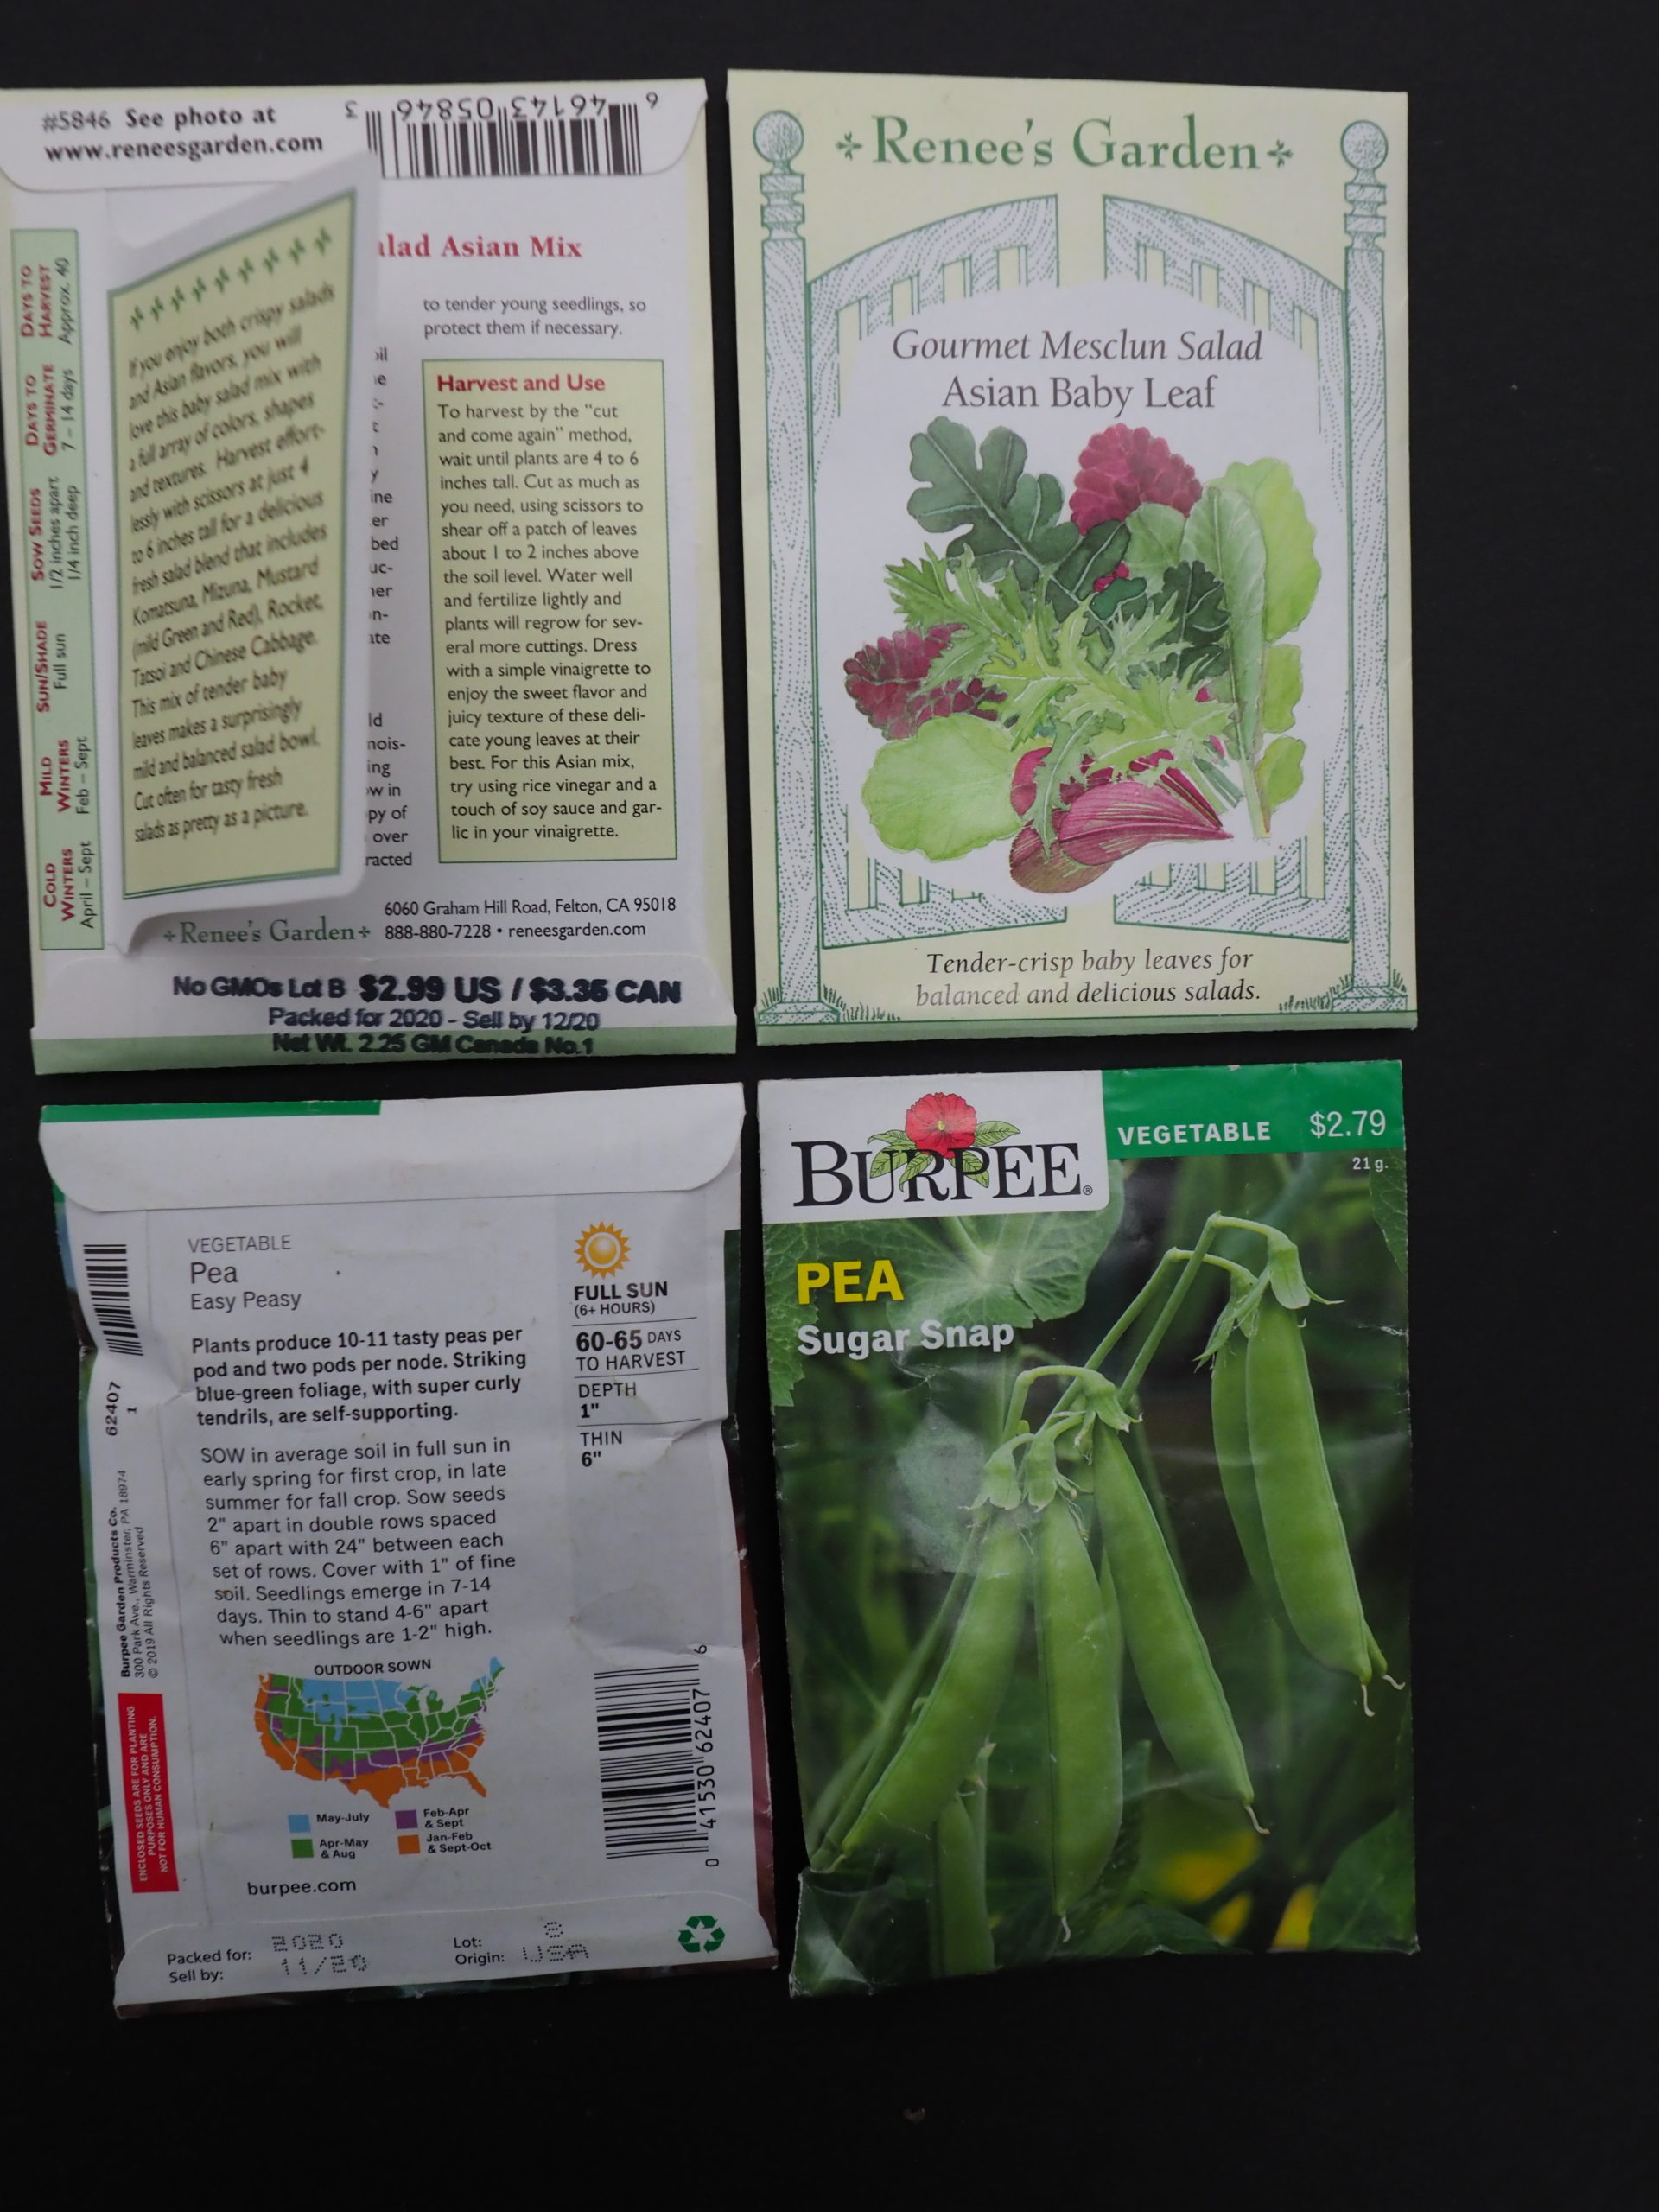 Renee’s seed packets (top) have three distinct text sections about the seed in the packet and the packet artwork is visually appealing. The information on the left (long) side includes both germination and days to harvest.  The Burpee seed packets offer much less for the new or inquisitive gardener.